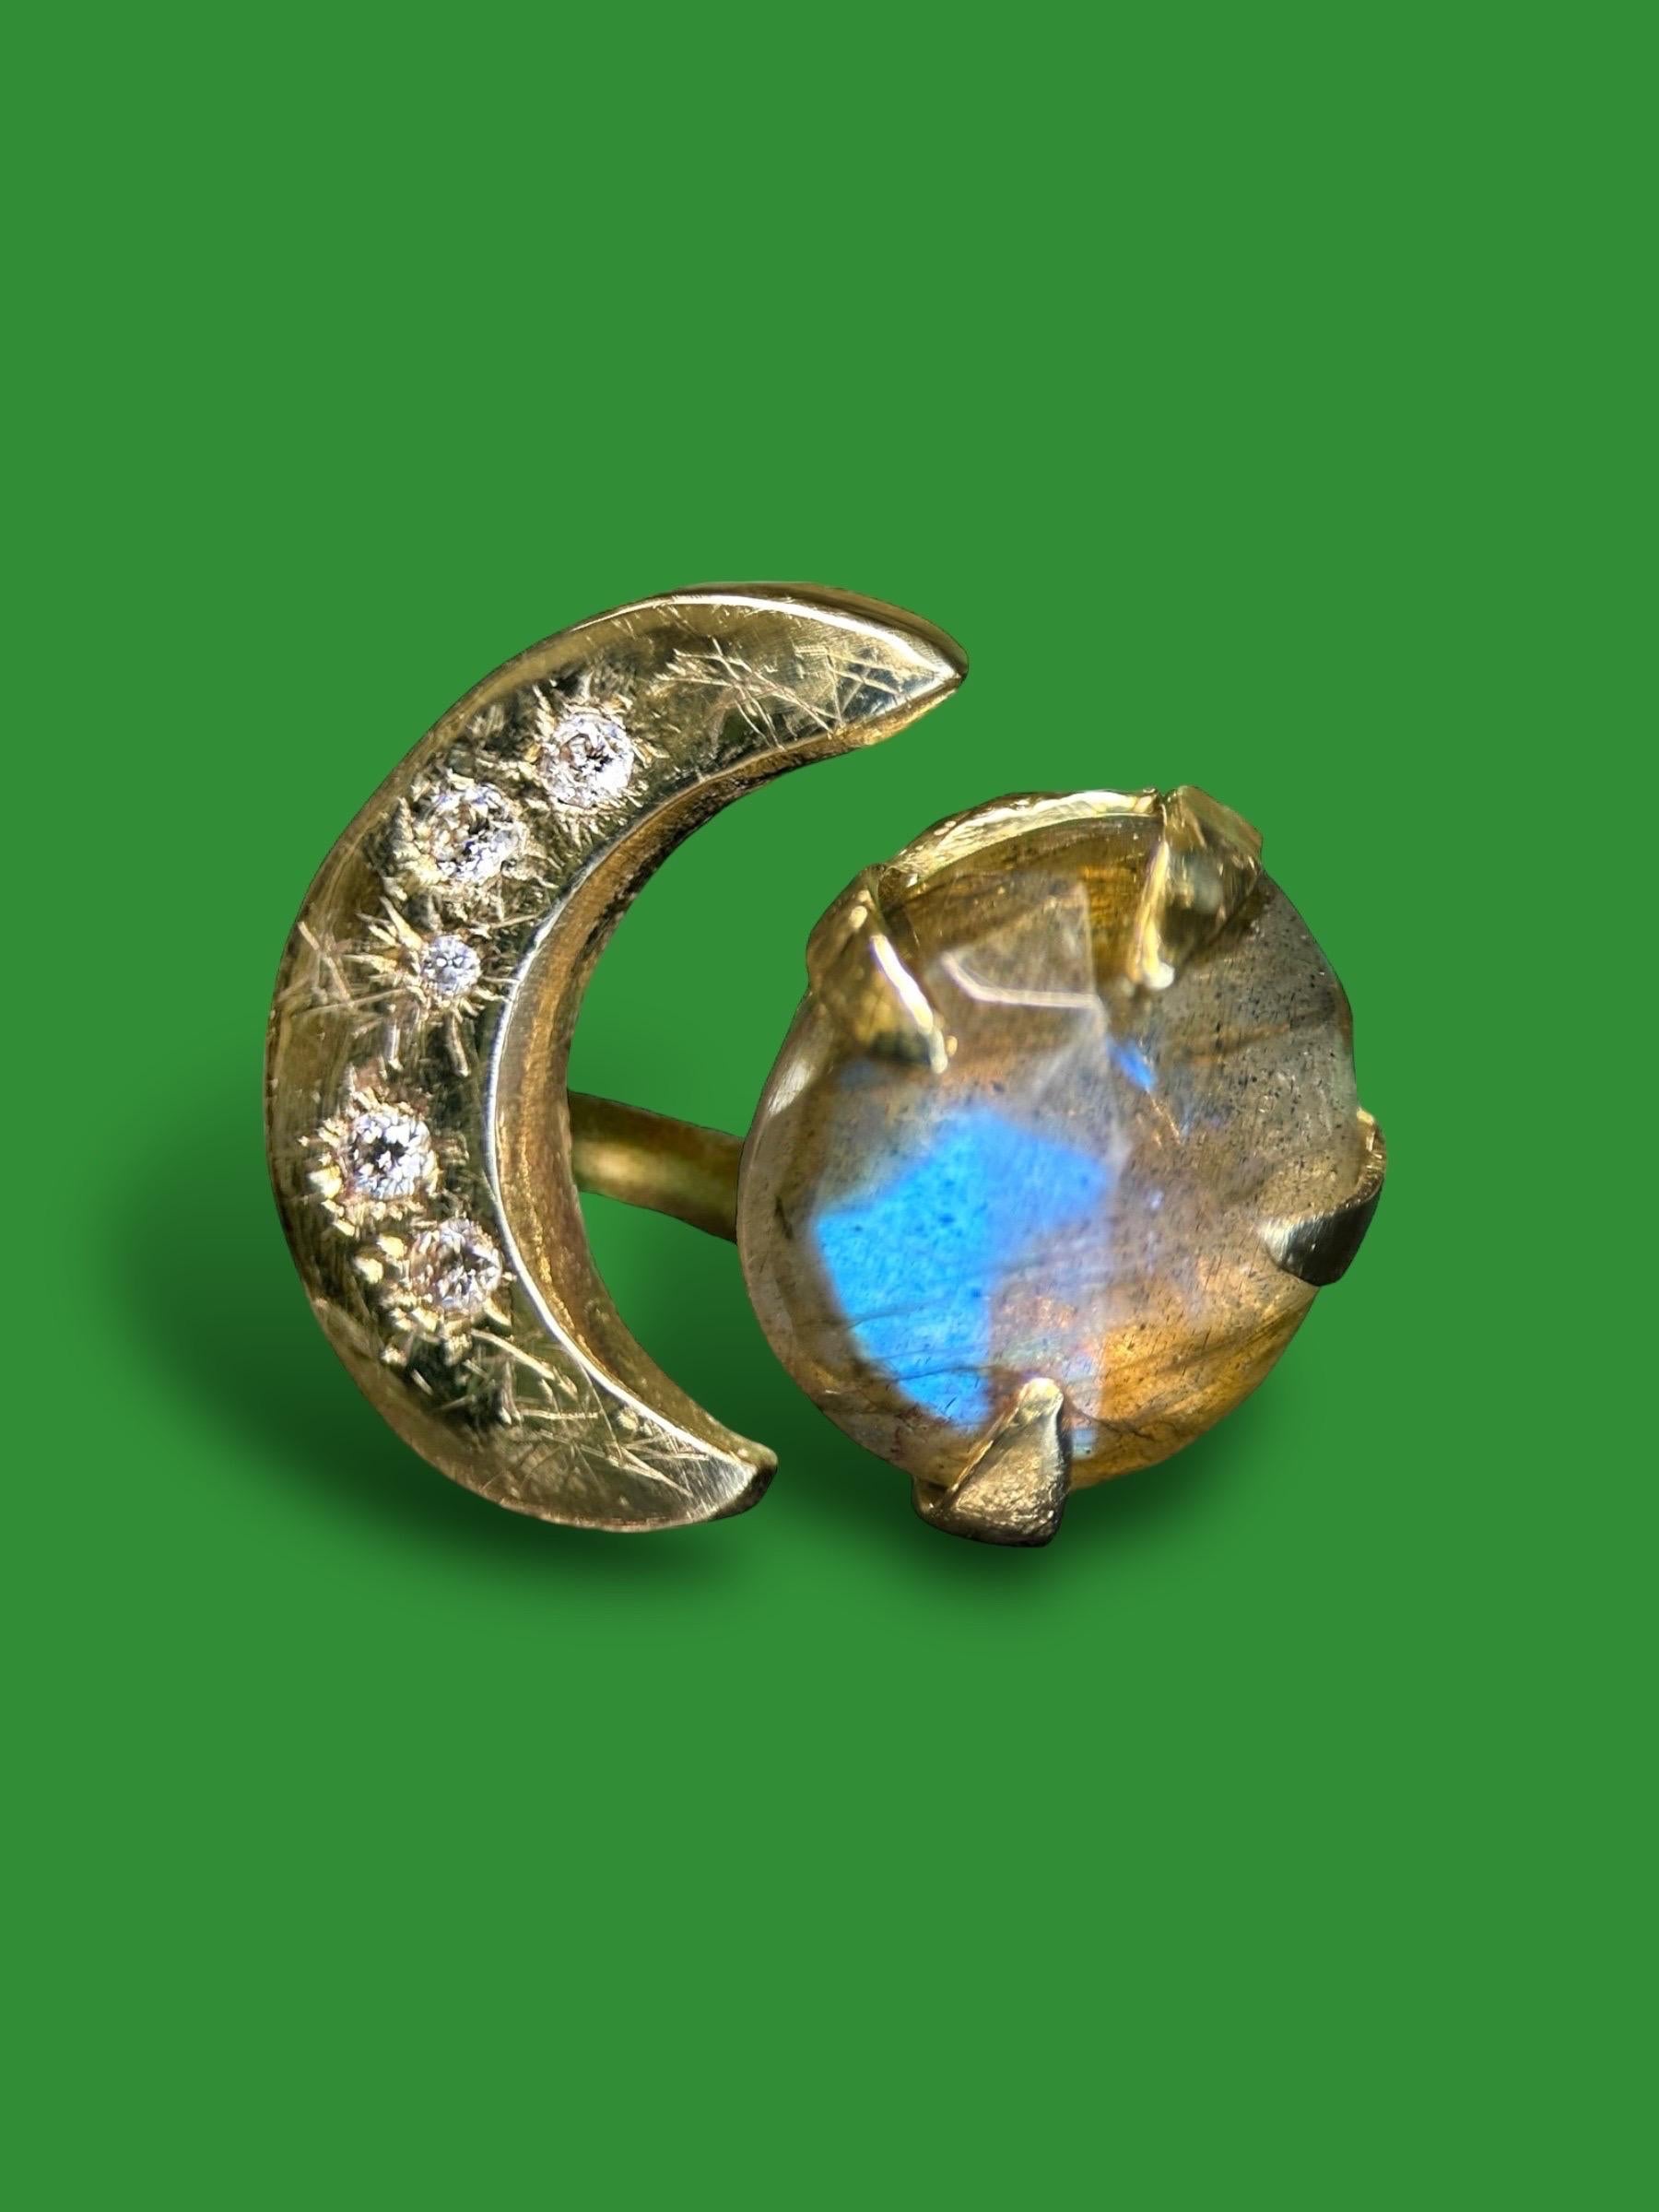 Introducing our exquisite handcrafted Moon Crescent Ring with Diamonds and a Labradorite ring in 14k yellow gold.

Crafted with meticulous attention to detail, this ring features a delicate moon crescent design that symbolizes the beauty and mystery